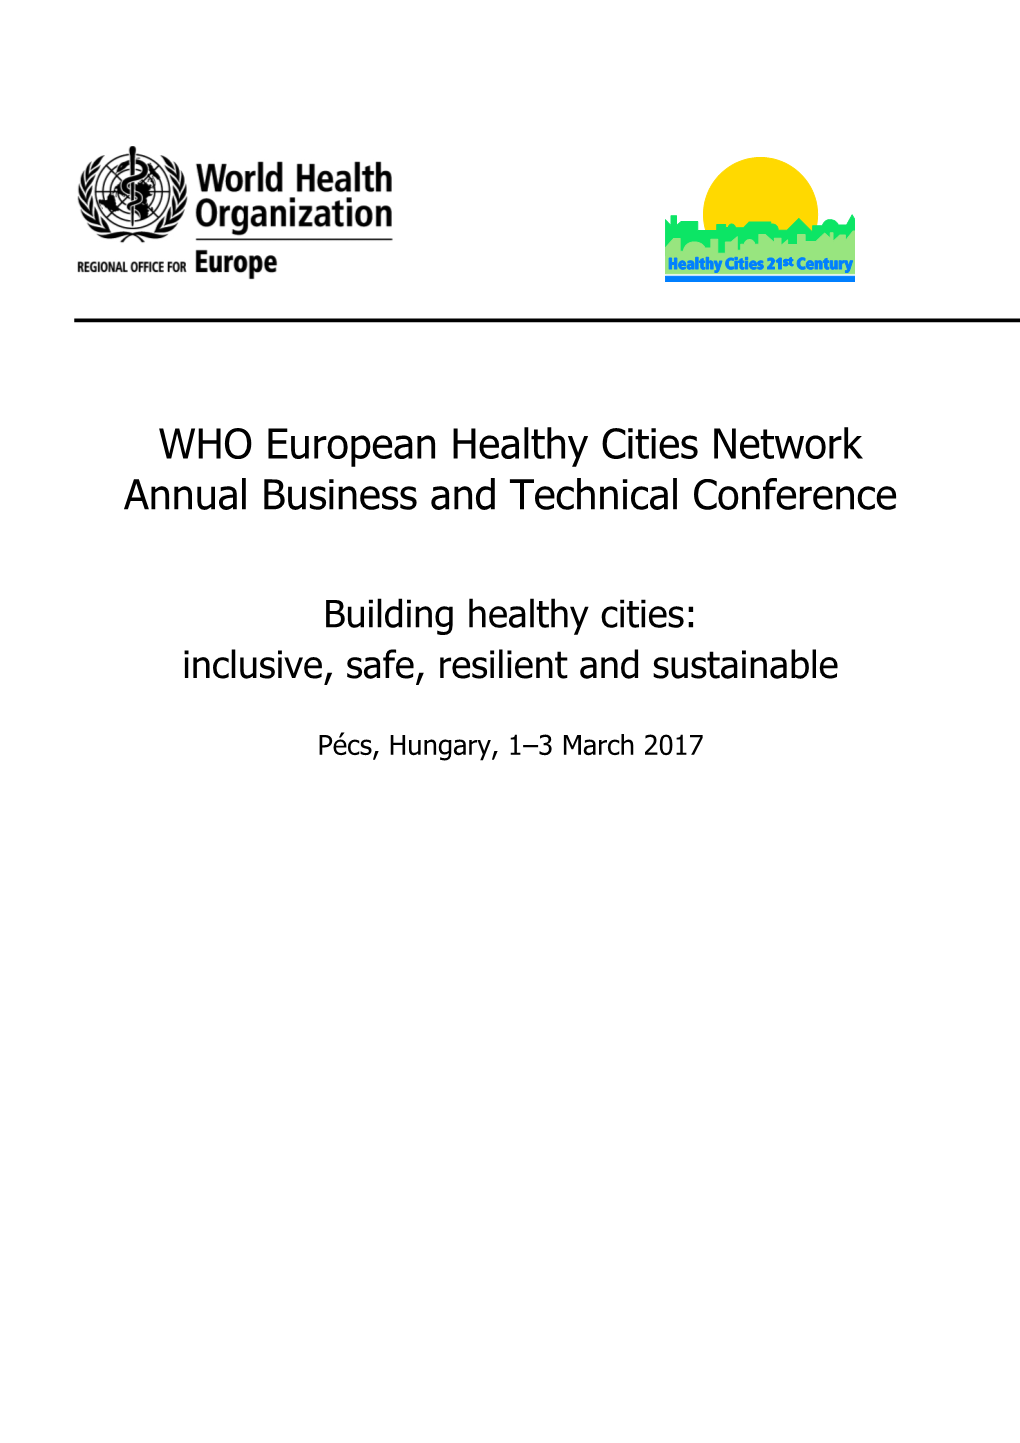 Building Healthy Cities: Inclusive, Safe, Resilient and Sustainable